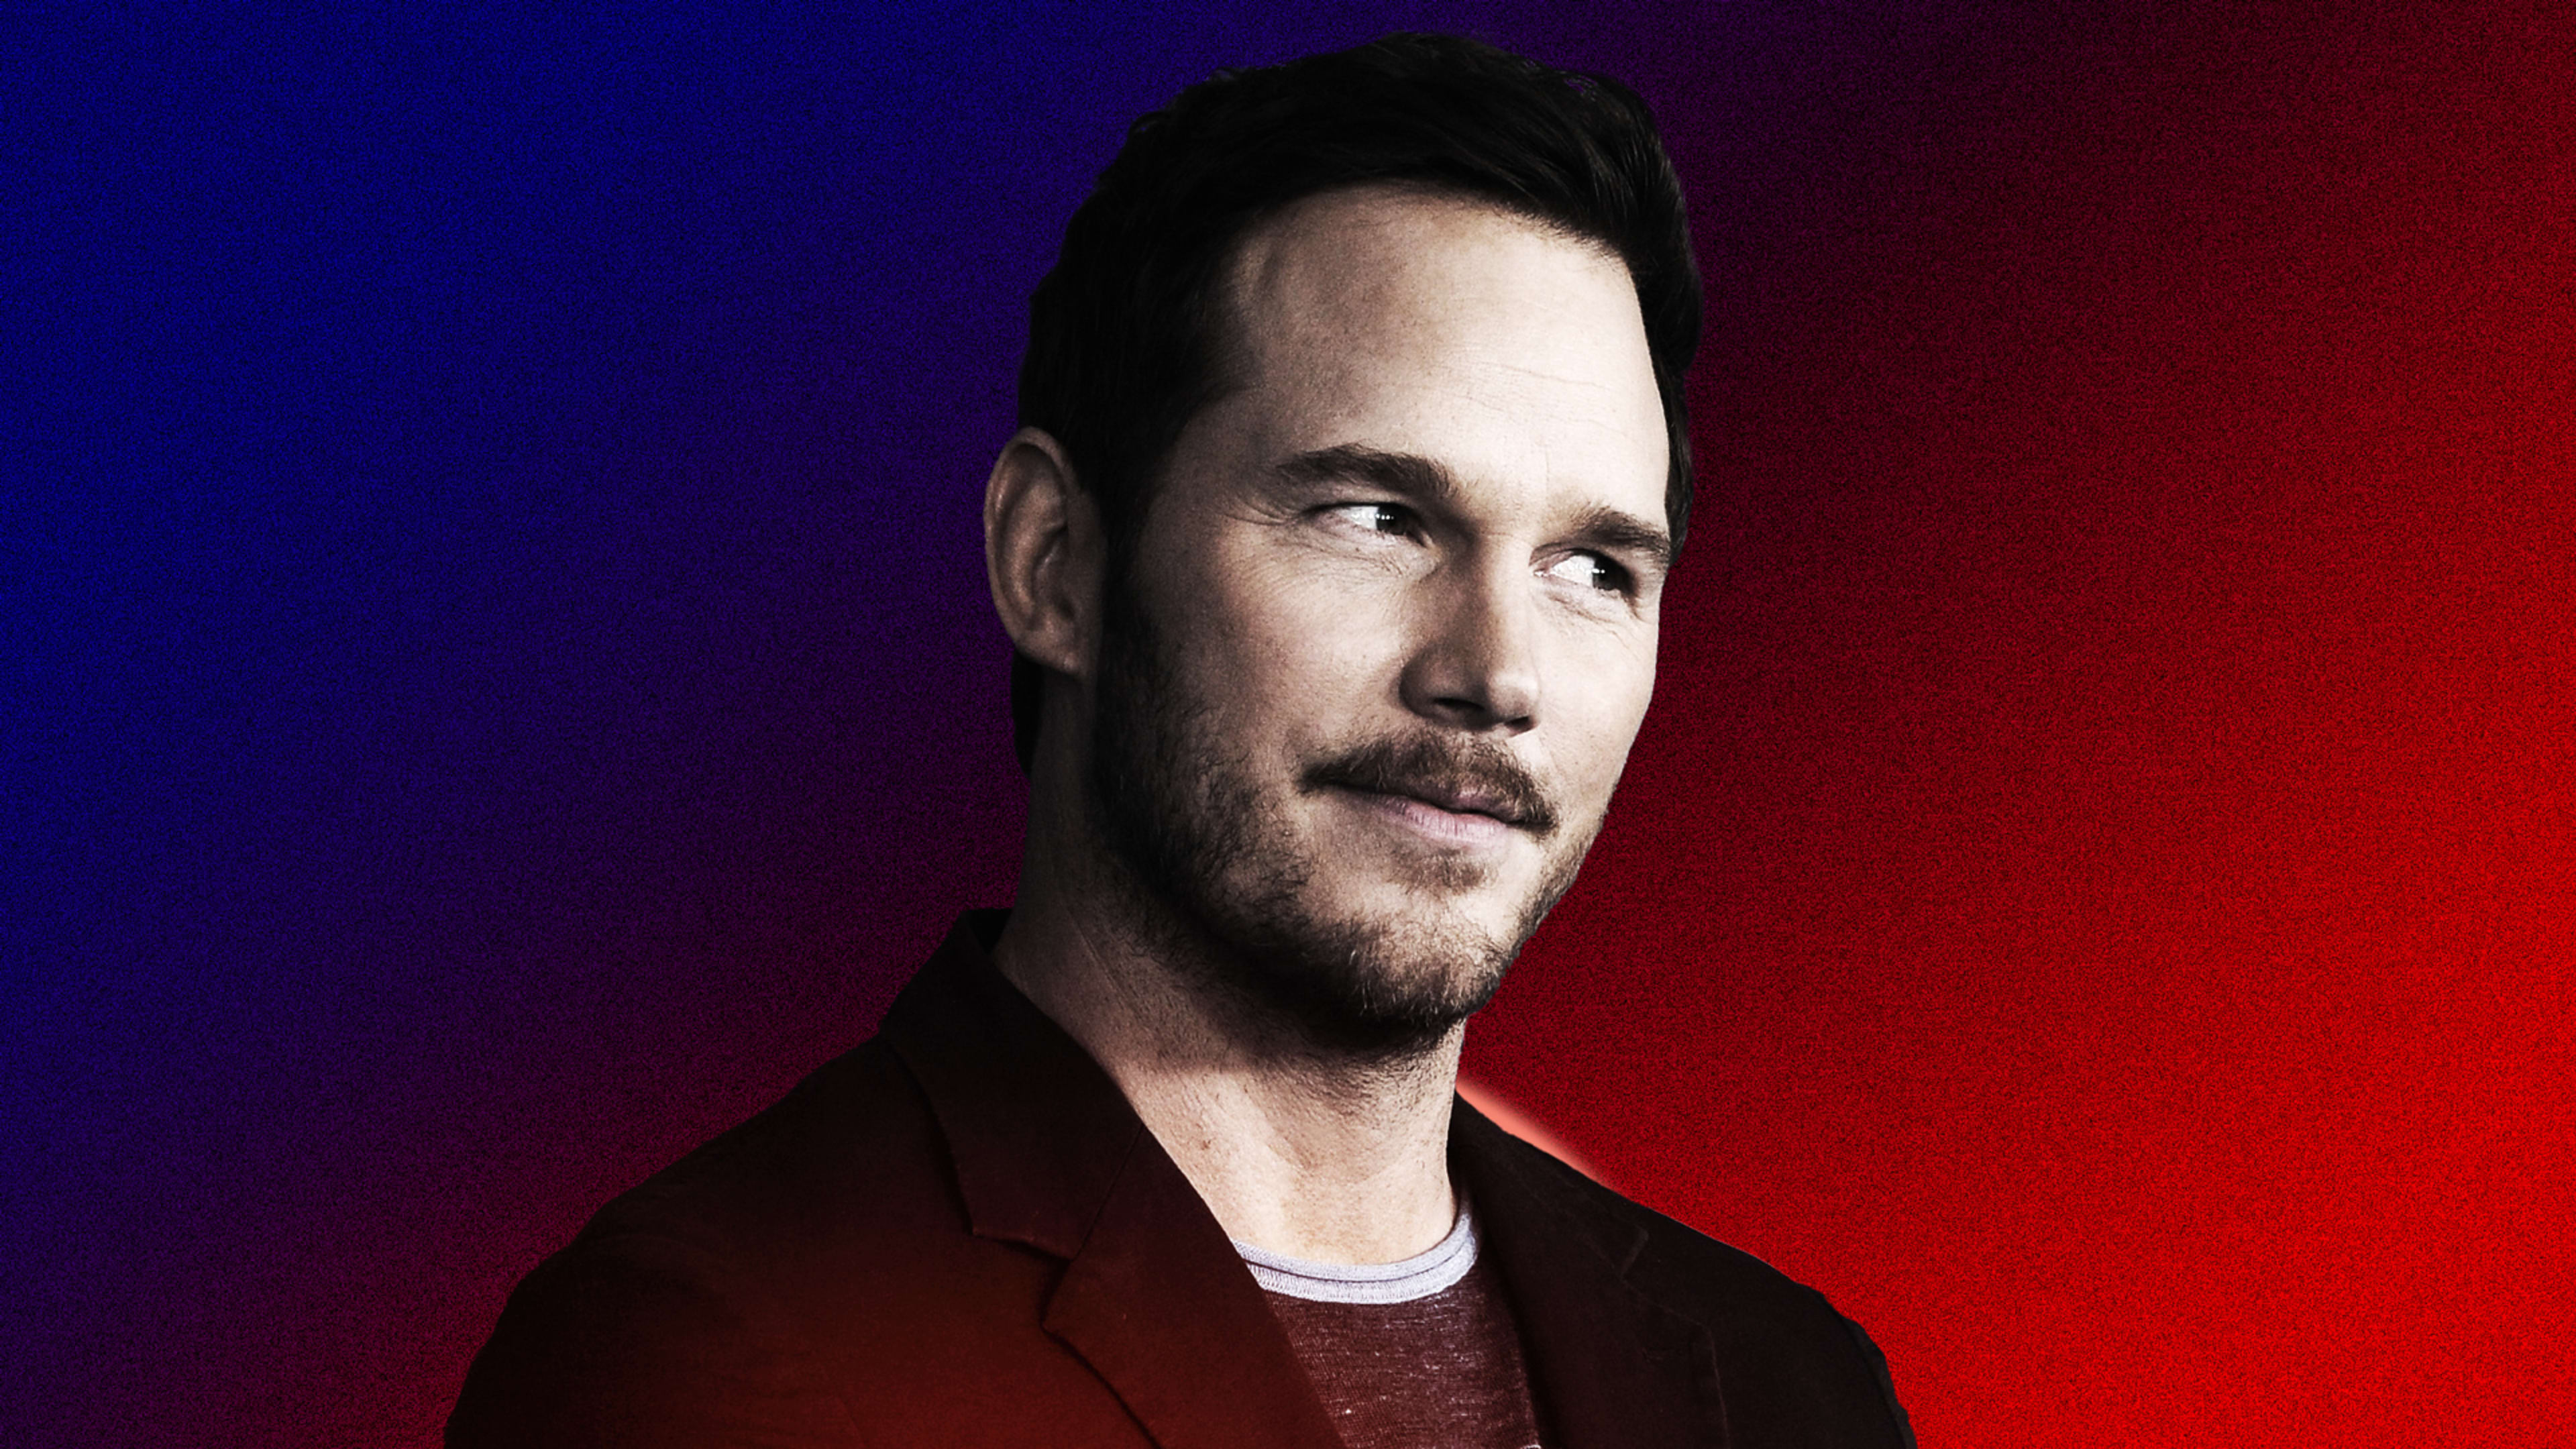 Why unsubstantiated rumors that Chris Pratt is a Trump supporter went viral on Twitter